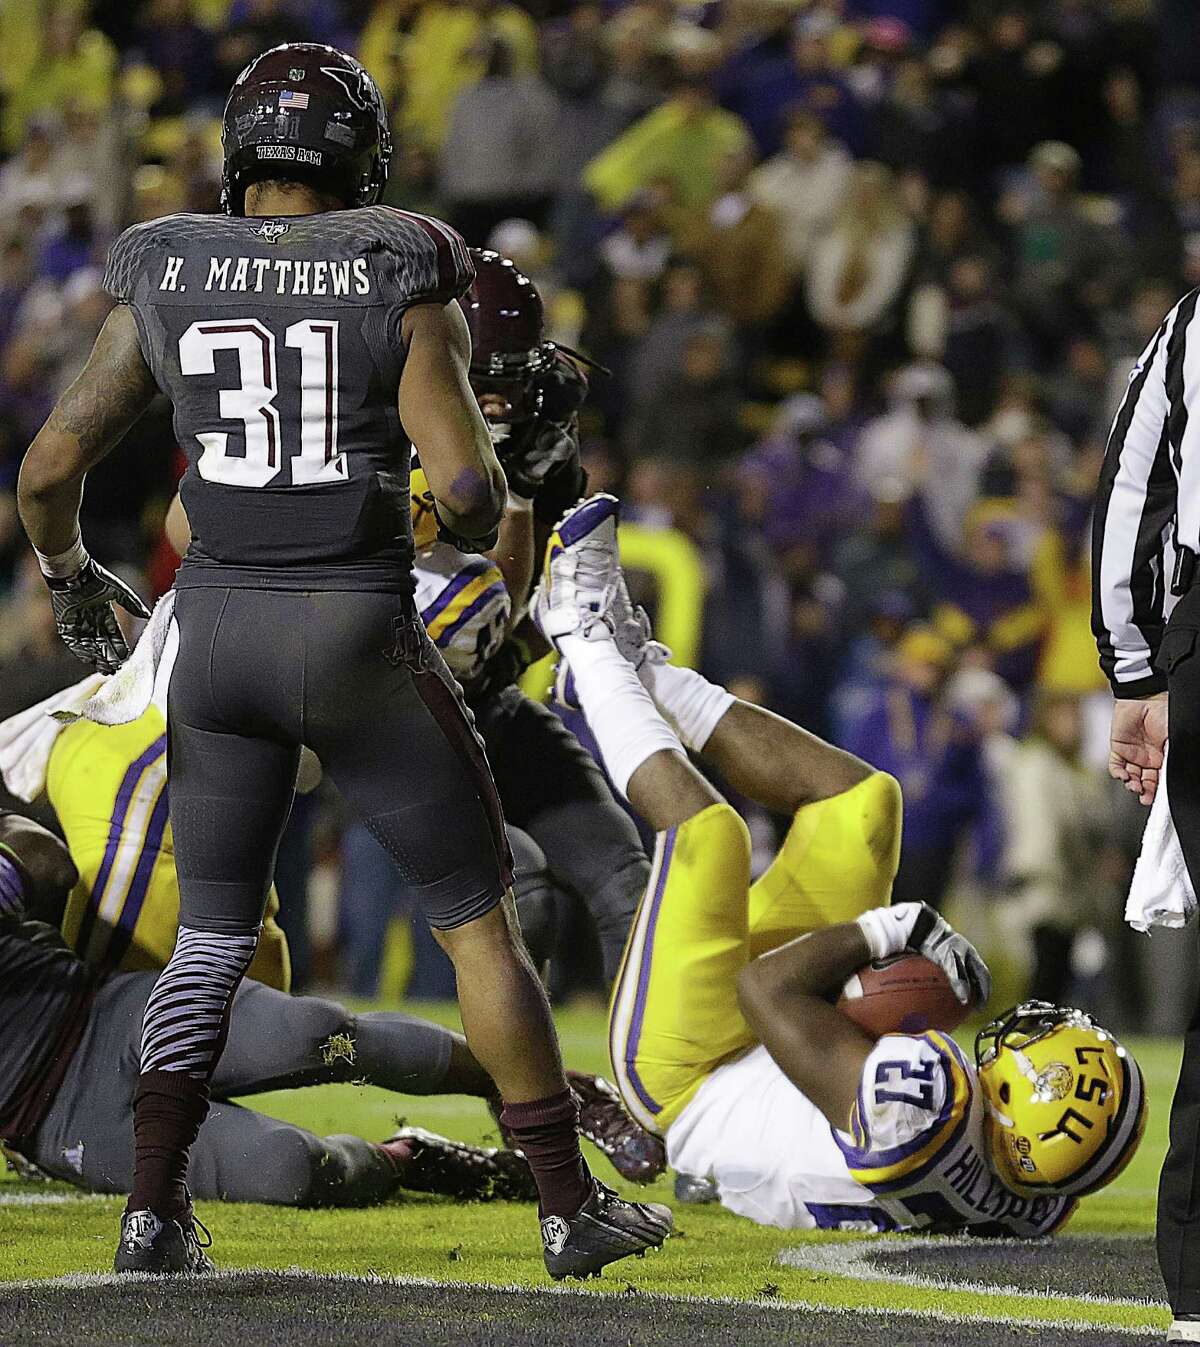 LSU running back Kenny Hilliard (27) dives into the end zone on a rushing touchdown in the second half of an NCAA college football game against Texas A&M in Baton Rouge, La., Saturday, Nov. 23, 2013. LSU won 34-10. (AP Photo/Gerald Herbert)